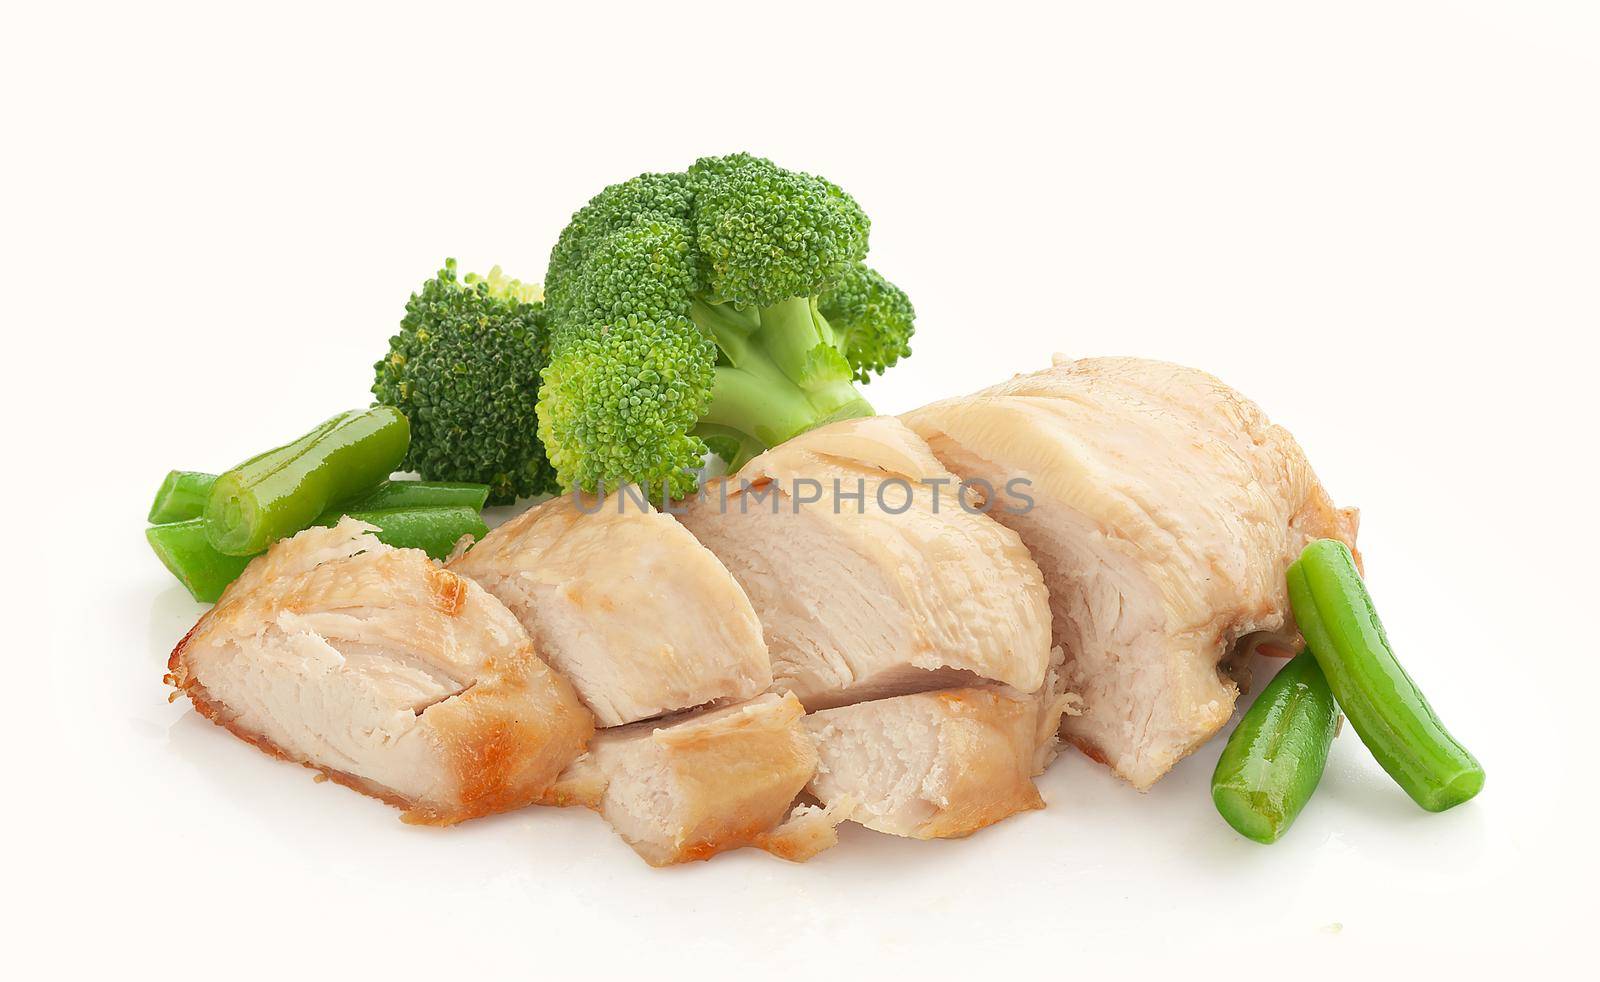 Baked chicken breast with vegetables by Angorius